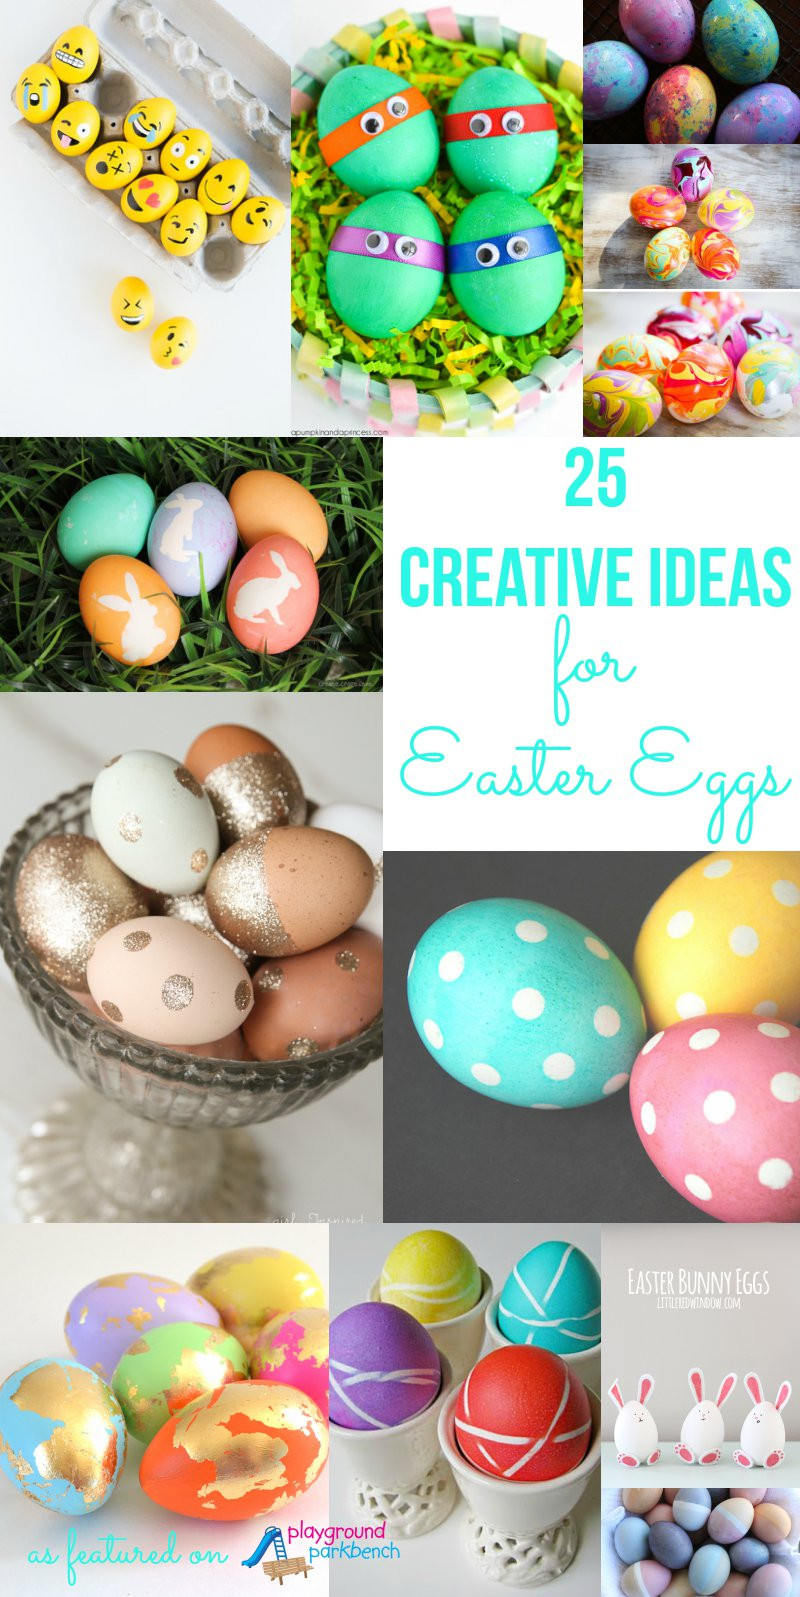 Easter Egg Decorating Ideas
 25 Creative Ideas for Decorating Easter Eggs